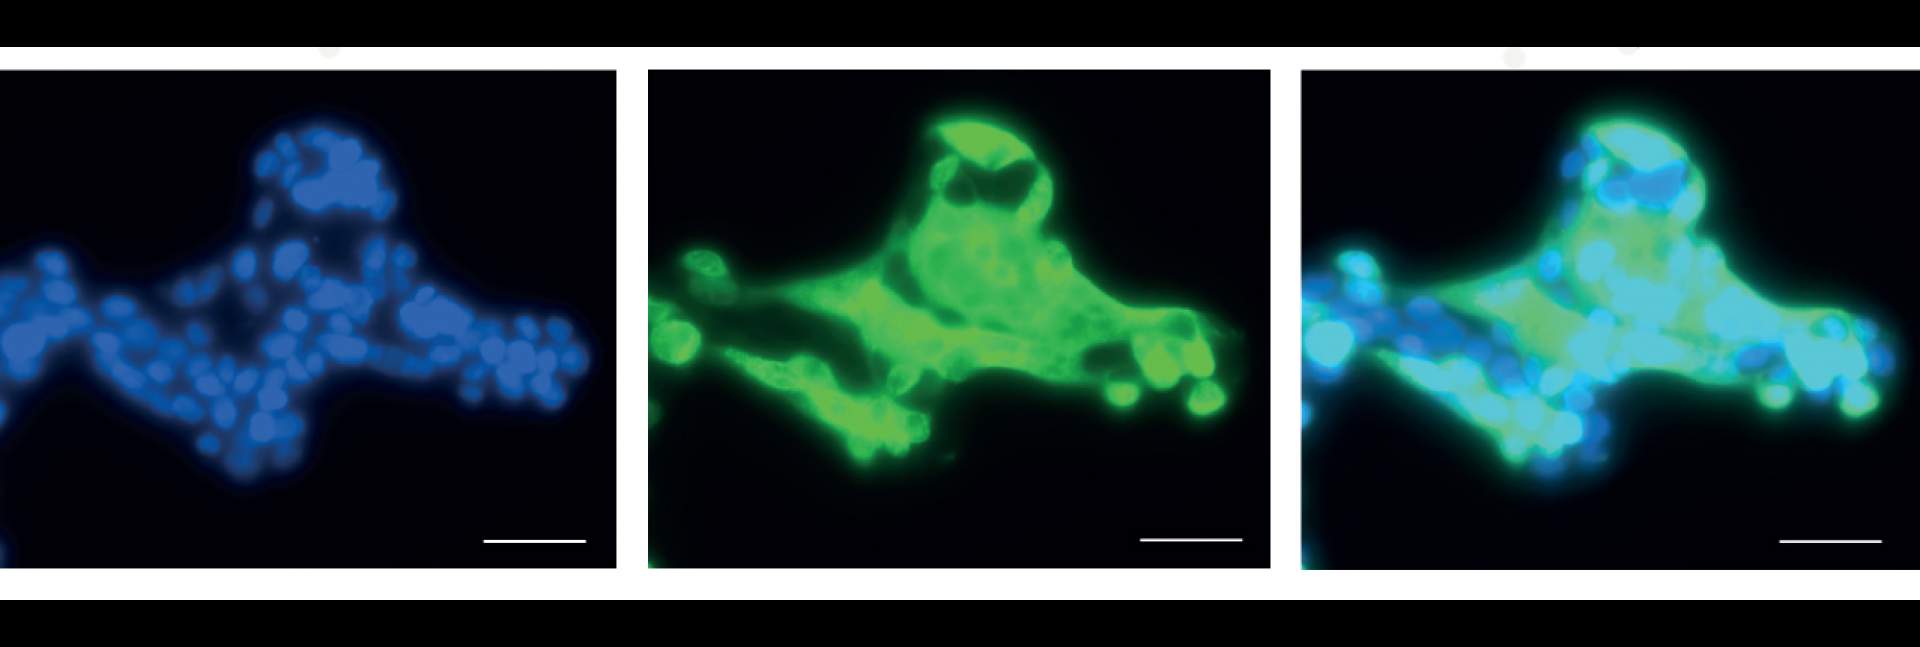 Microscopic image of cultured human lung cells infected with SARS-CoV-2. In green – SARS-CoV-2 staining; In blue – Staining of the cells’ nuclei